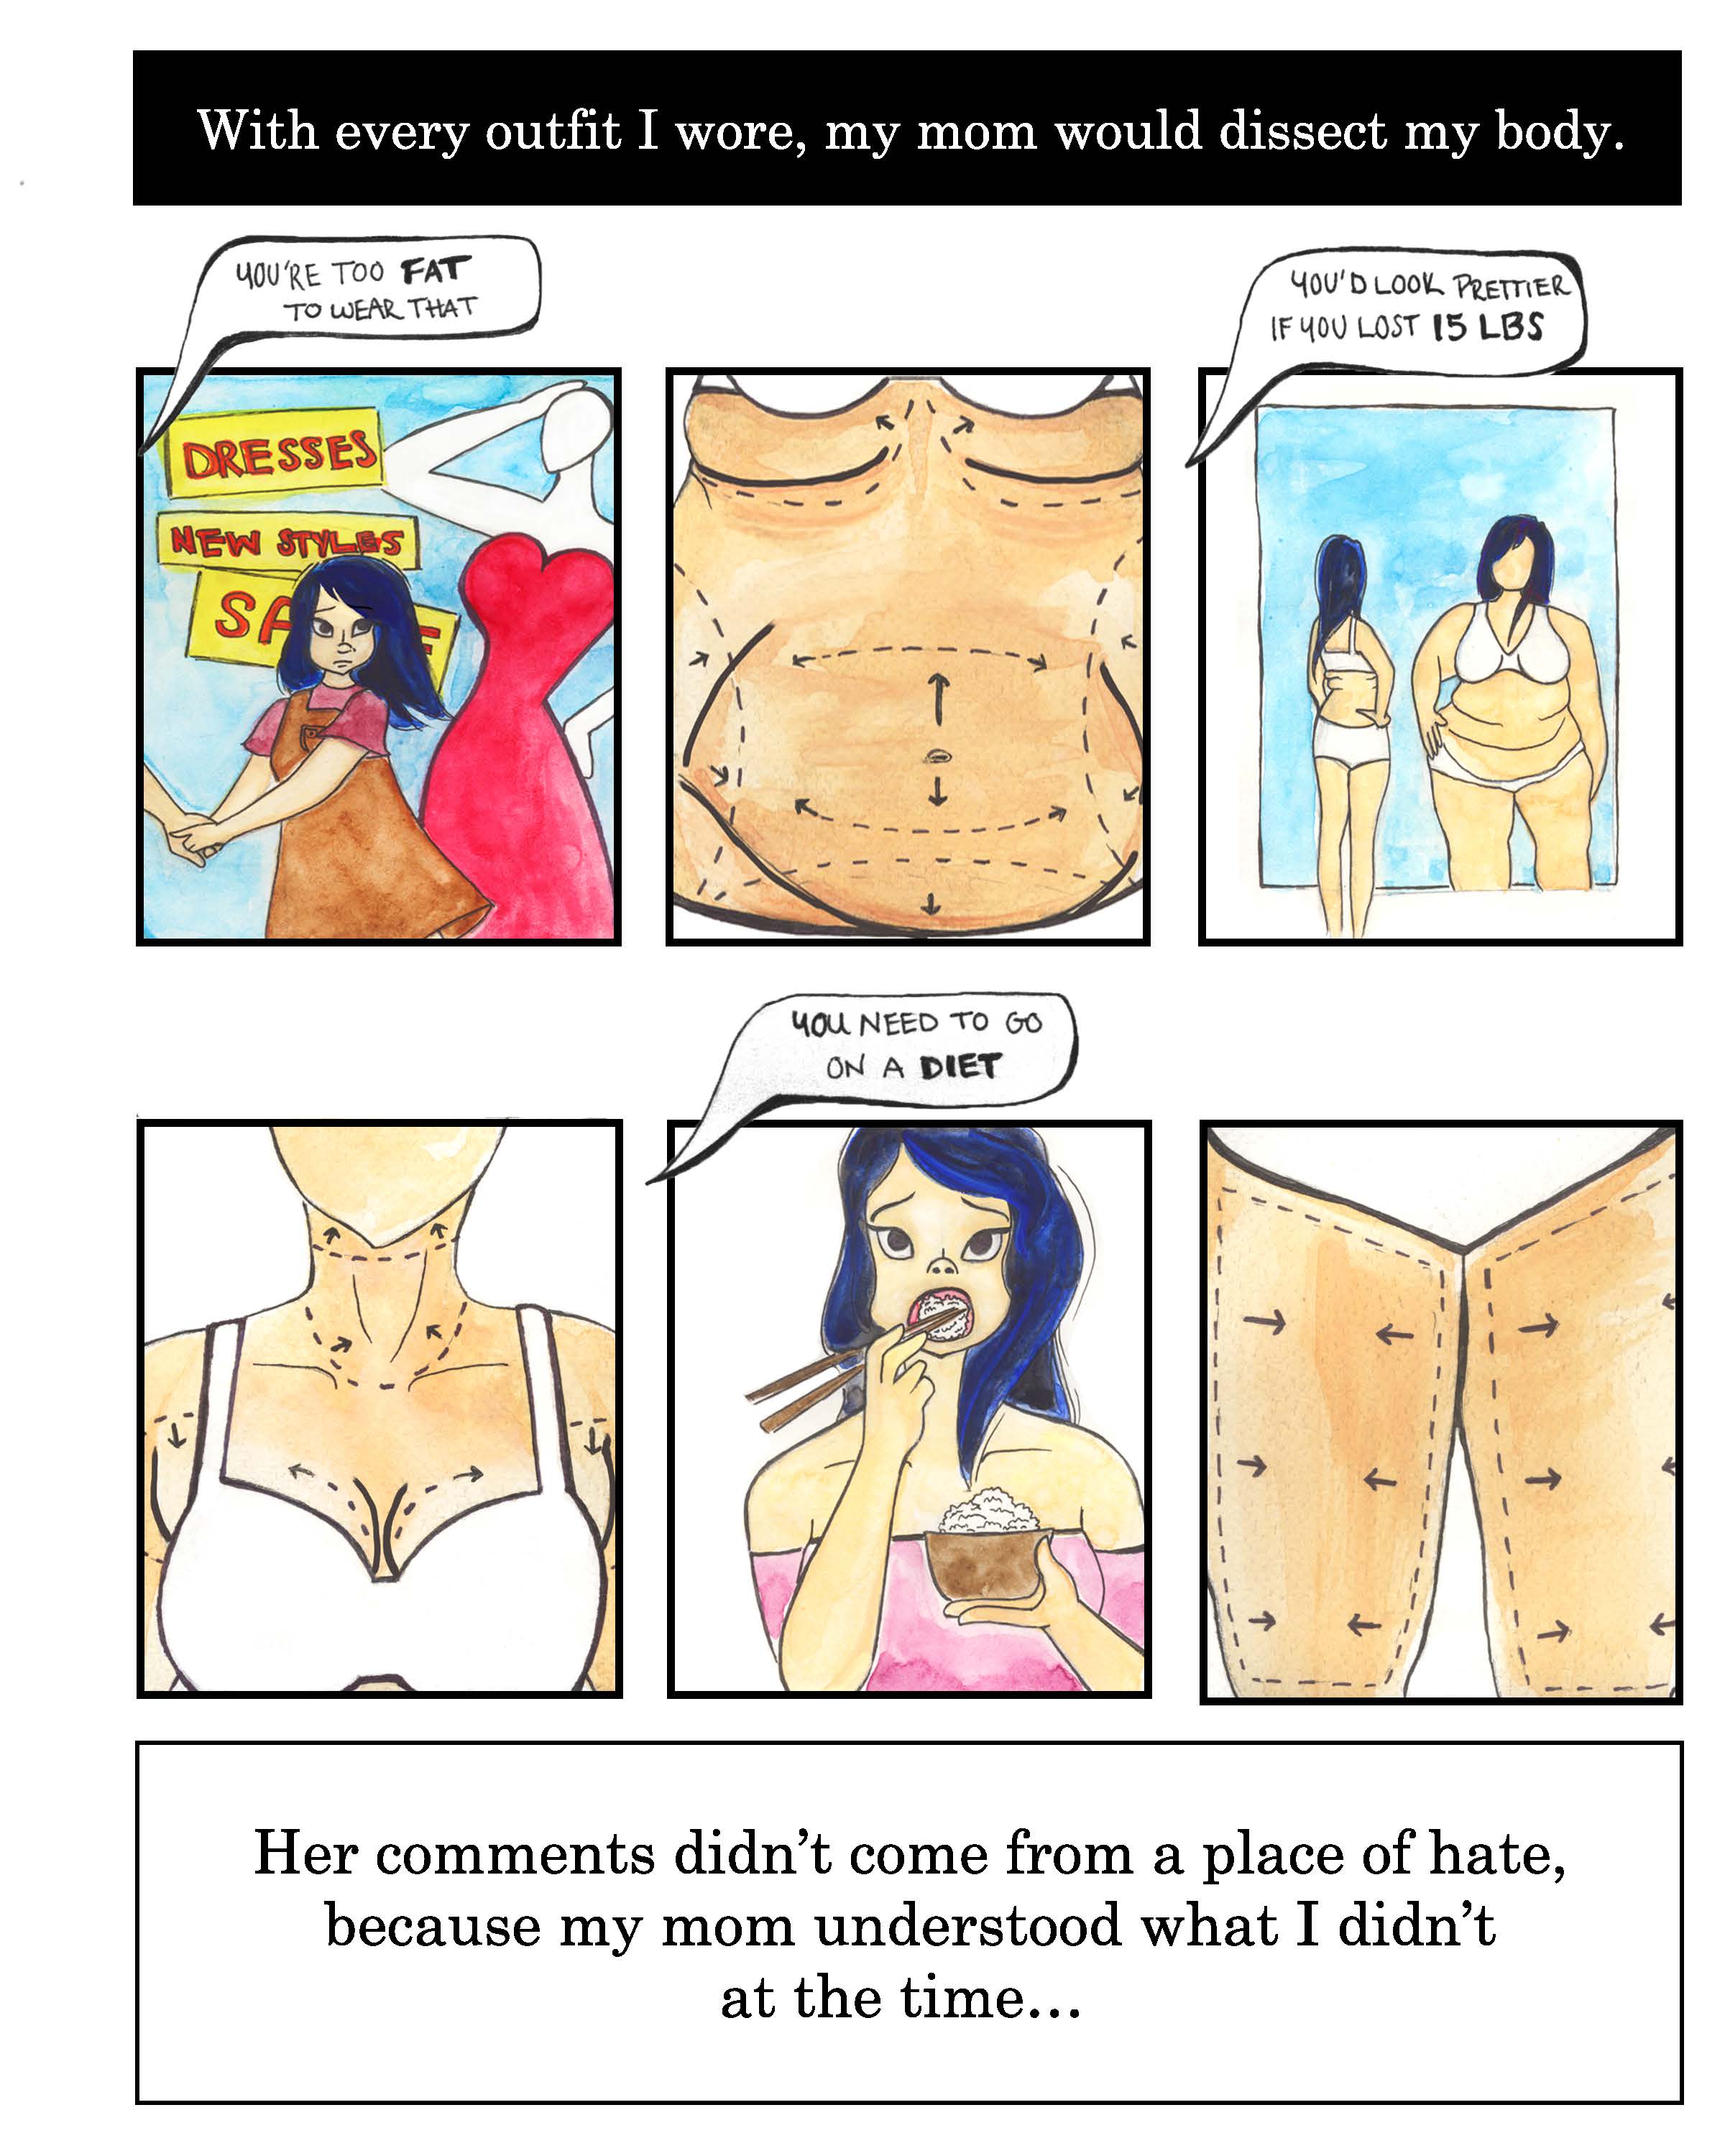 Body shape expectations and self-ideal body shape discrepancy in